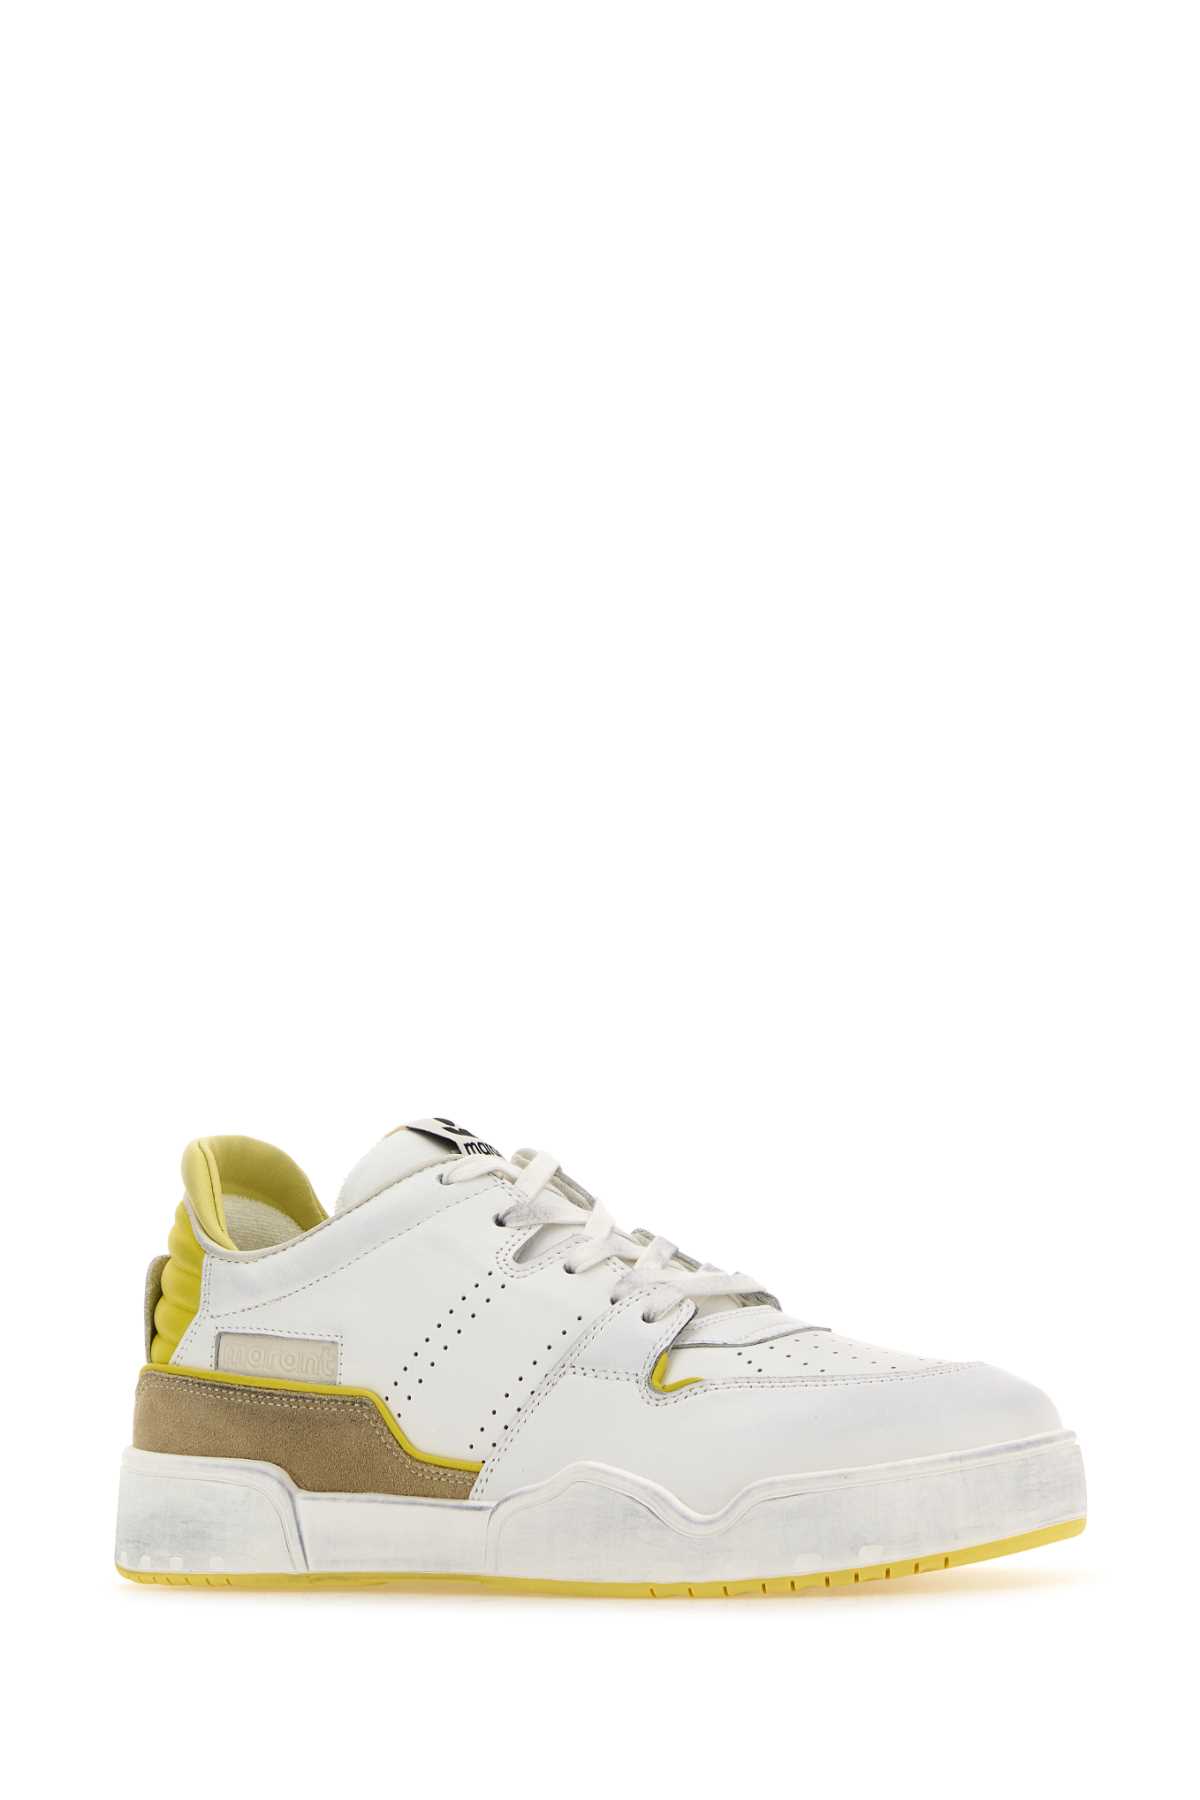 ISABEL MARANT MULTICOLOR LEATHER EMREEH SNEAKERS